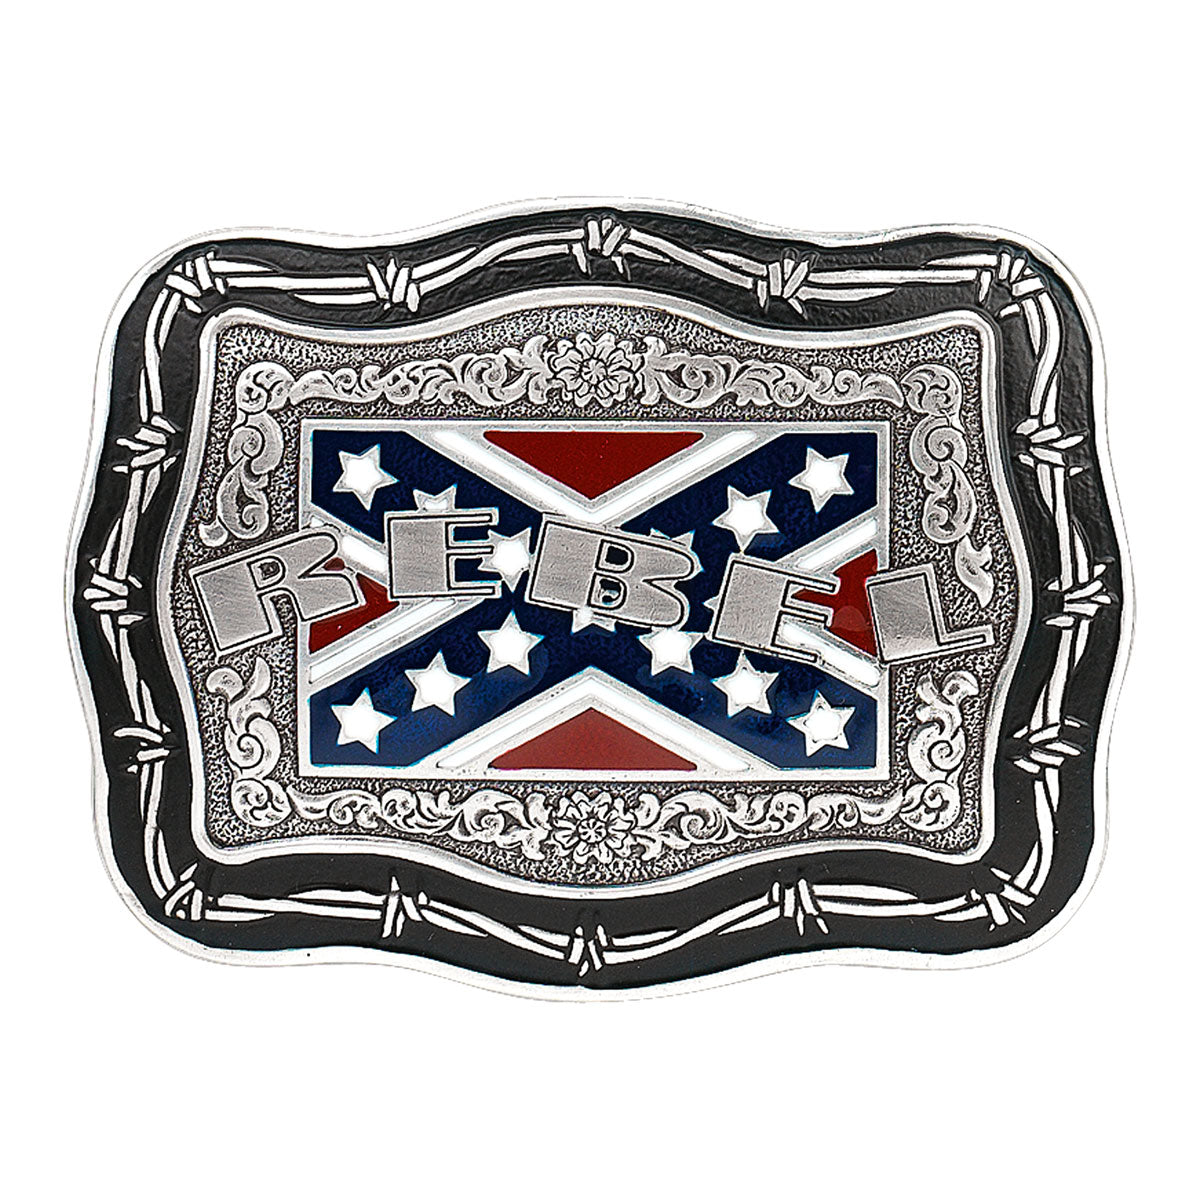 A Western themed with Barbed Wire edge border, Classic Western Scrolling. Rectangle shape is good for most body types without digging in to your mid section. Fits up to 1  1/2" belts. Dimensions are approx. 3 1/4" tall x 4 1/4"wide. Call or email about more "Heritage Buckles". We have several styles in our retail shop.